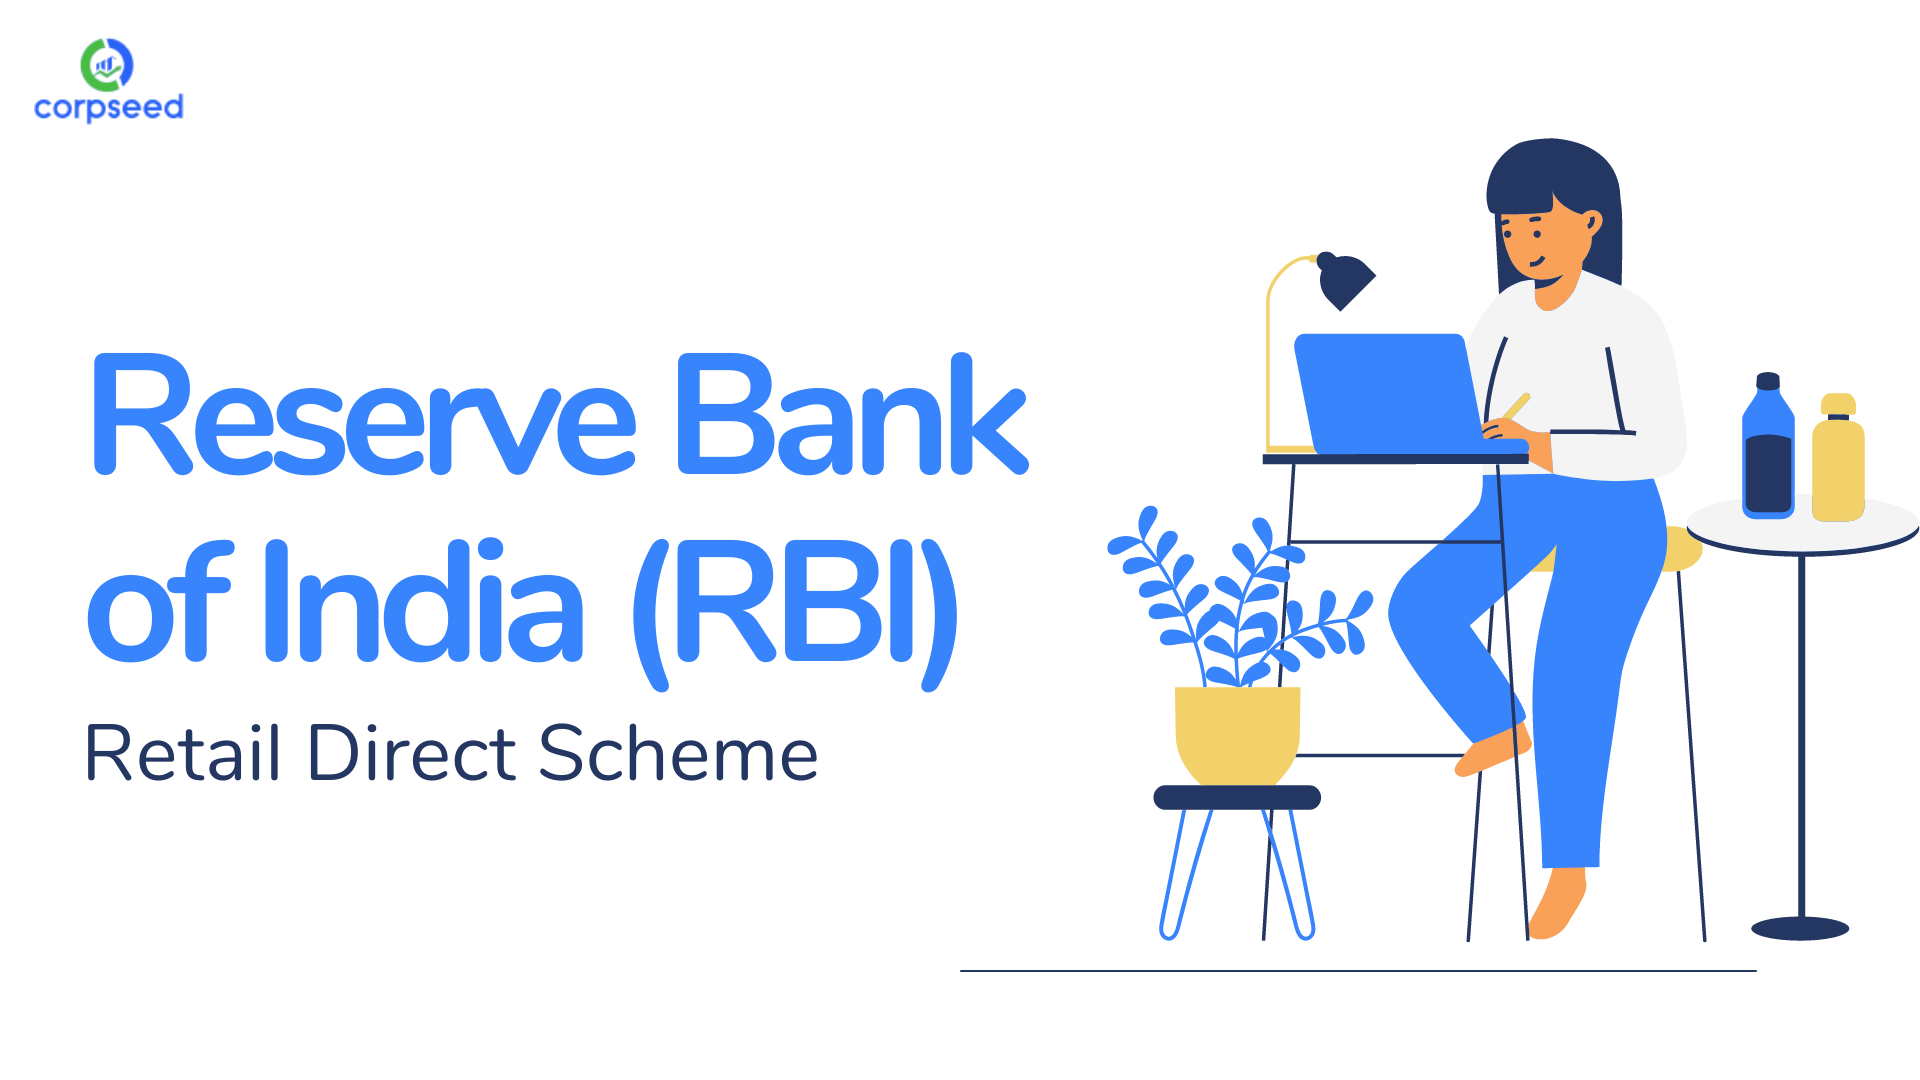 reserve-bank-of-india-rbi-retail-direct-schema-corpseed.png